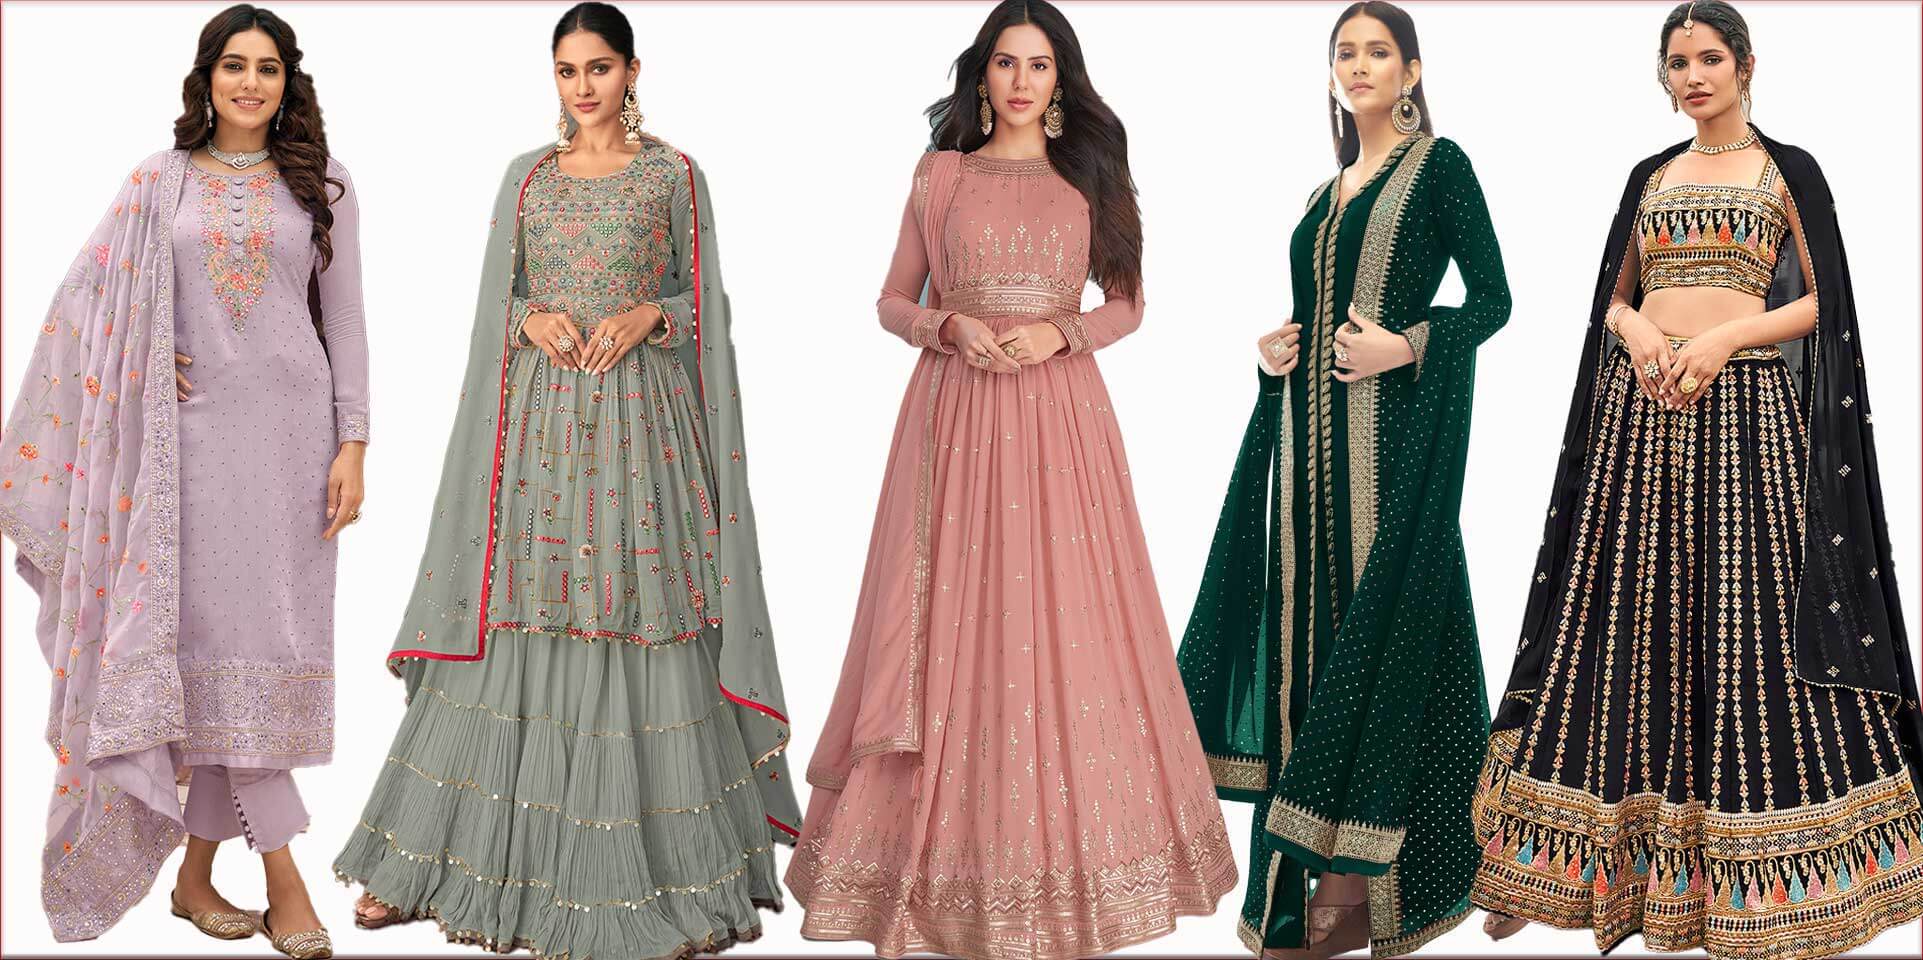 What to wear at different Indian wedding functions?